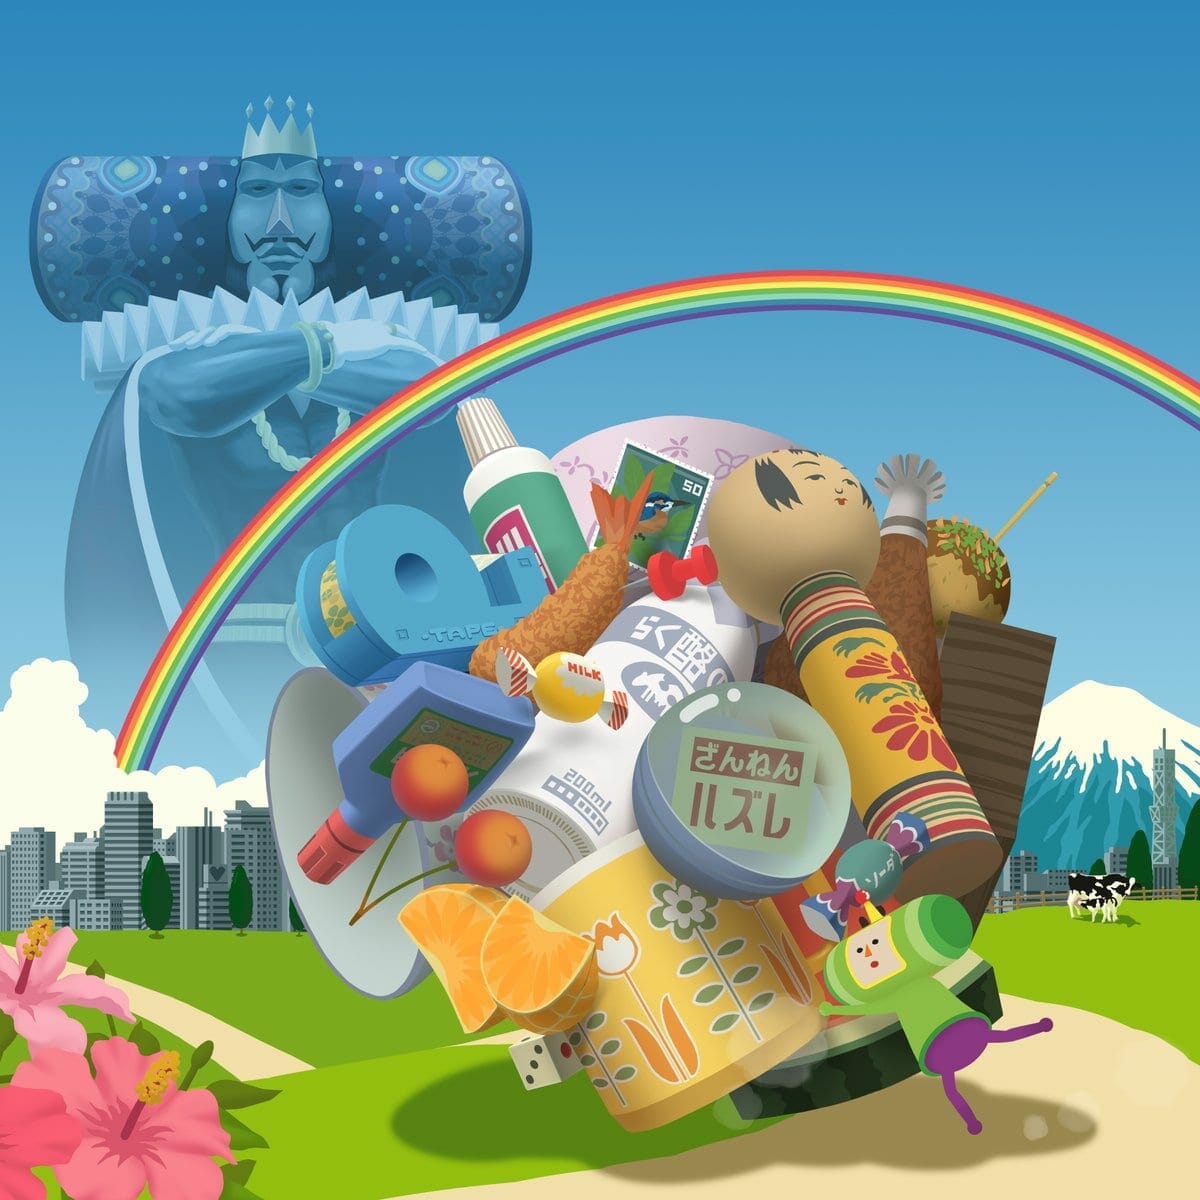 Katamari Damacy Reroll Release Date Revealed, will release with a Demo